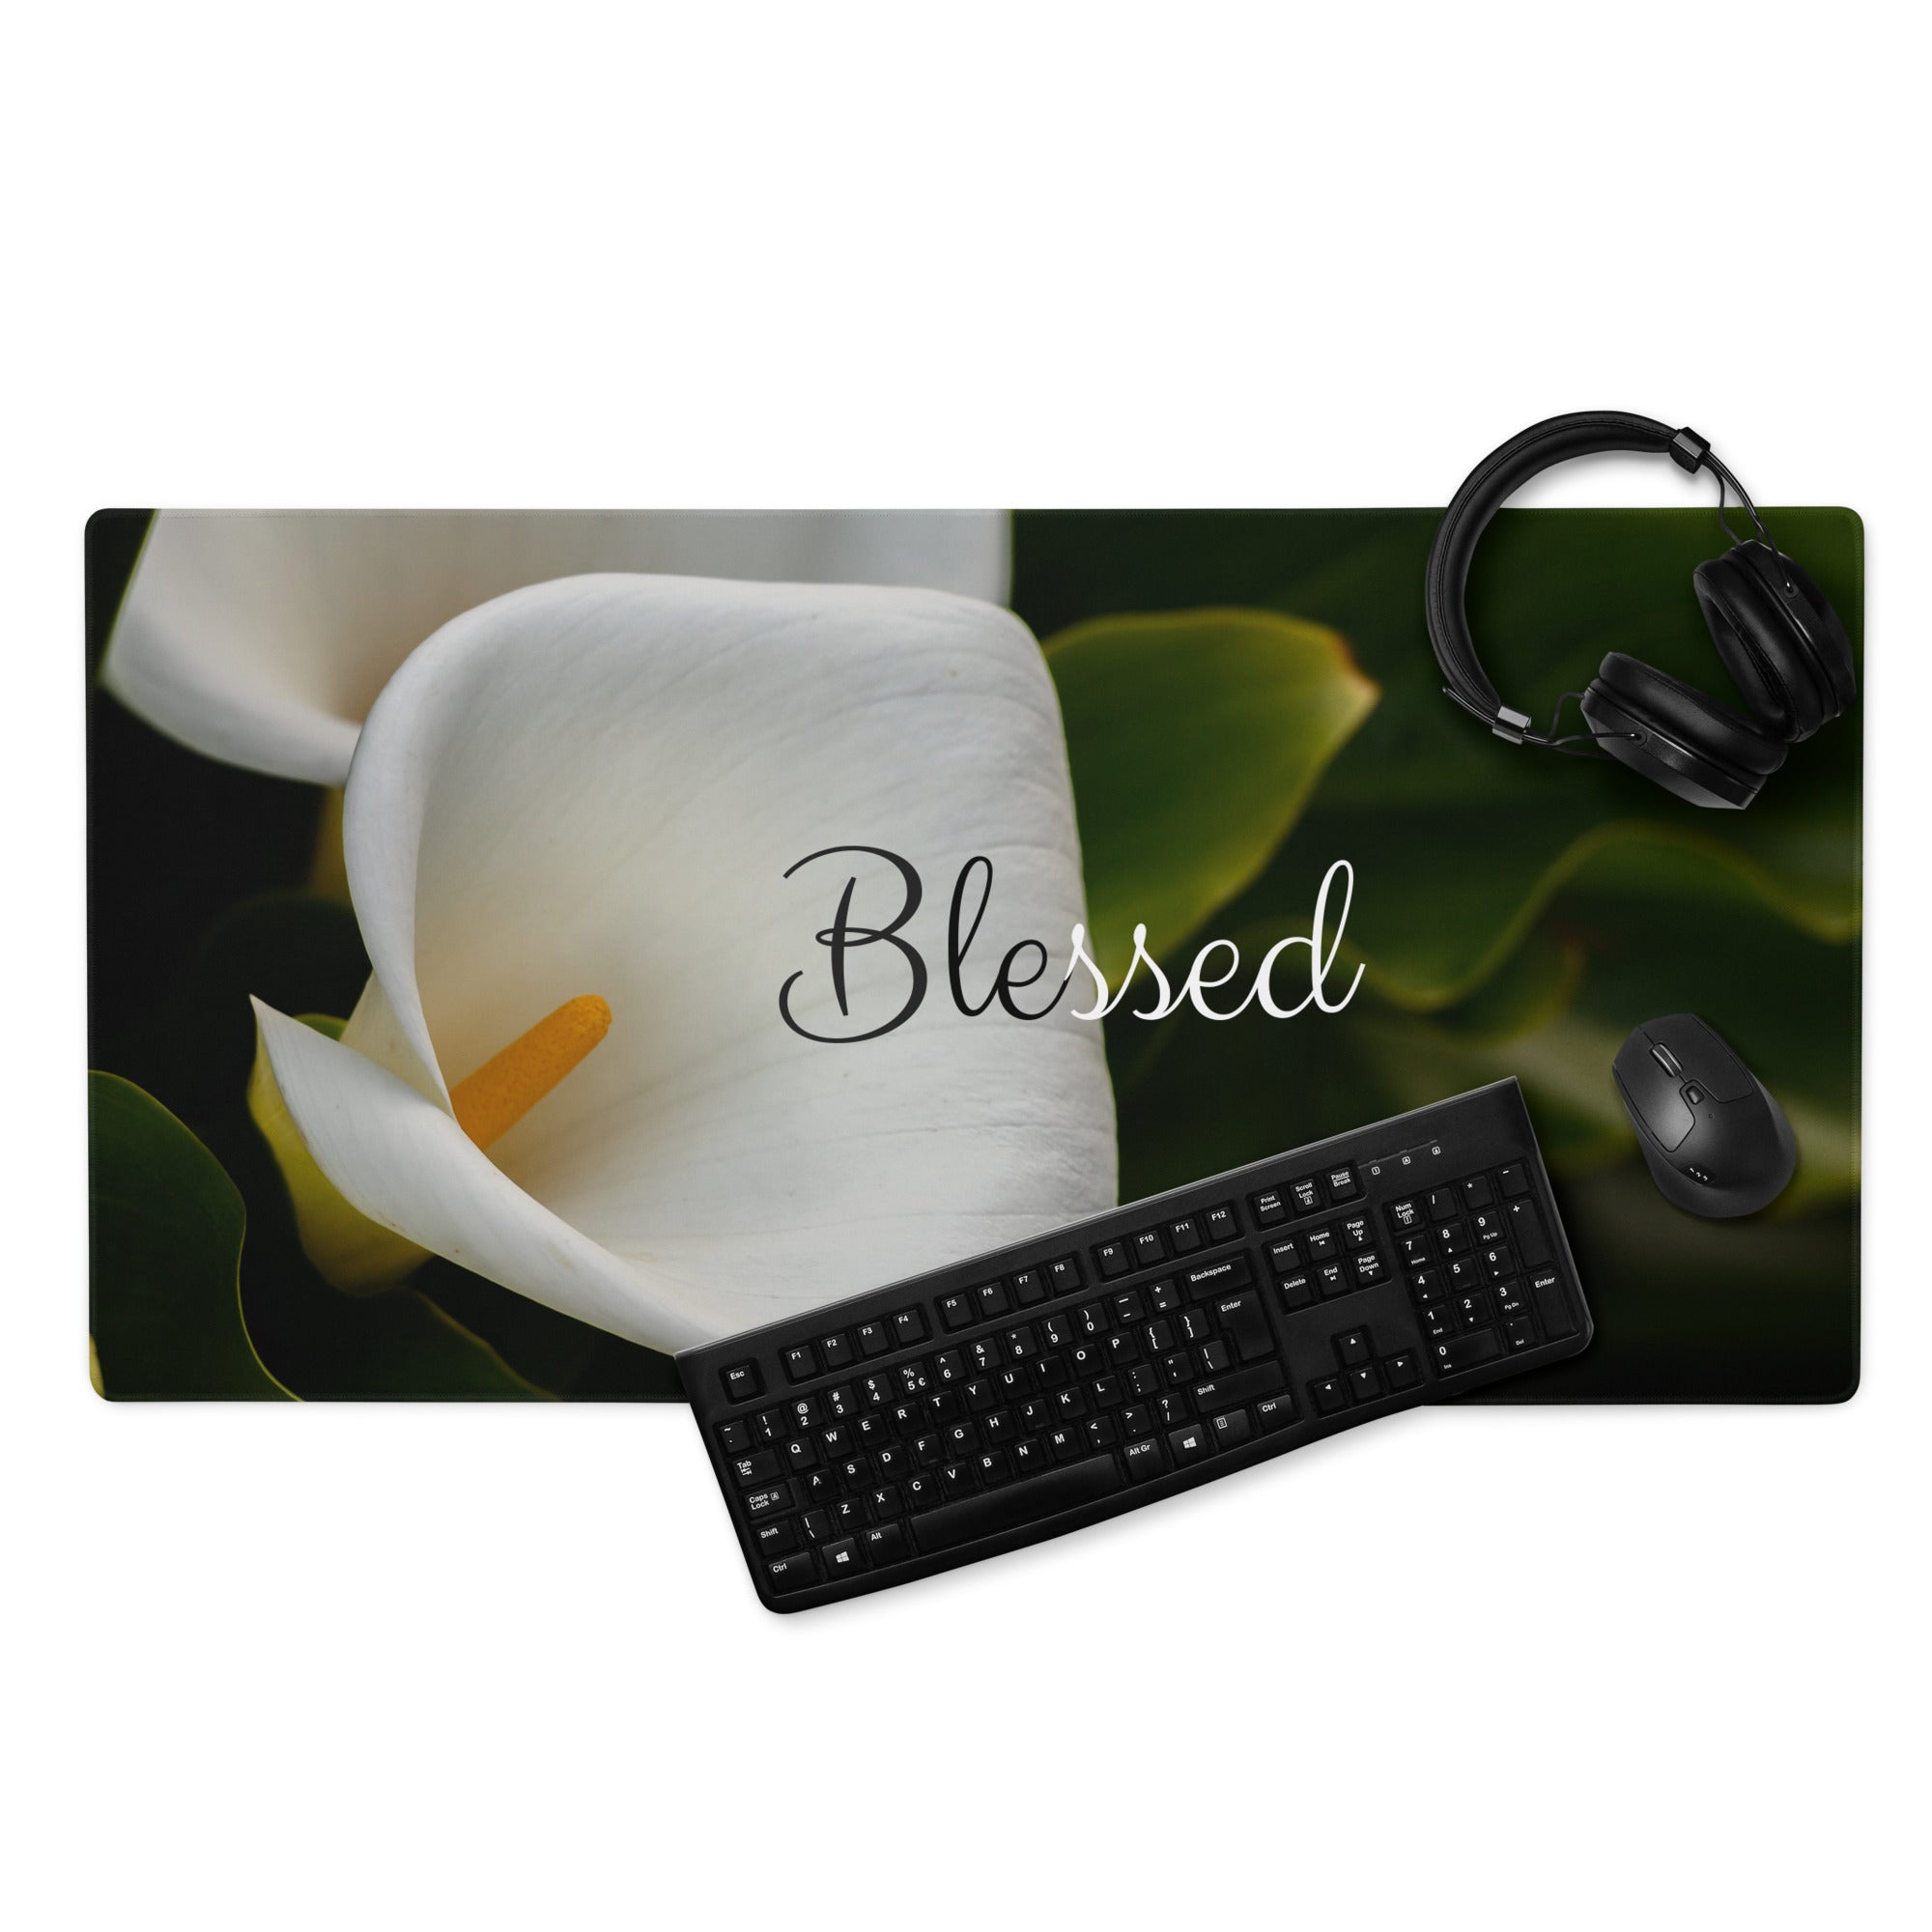 Calla Lily Gaming mouse pad Landscape Gaming Mouse Pad with RGB Led, Large Gaming Mouse Pad, Extended Mouse Pad for Gamers